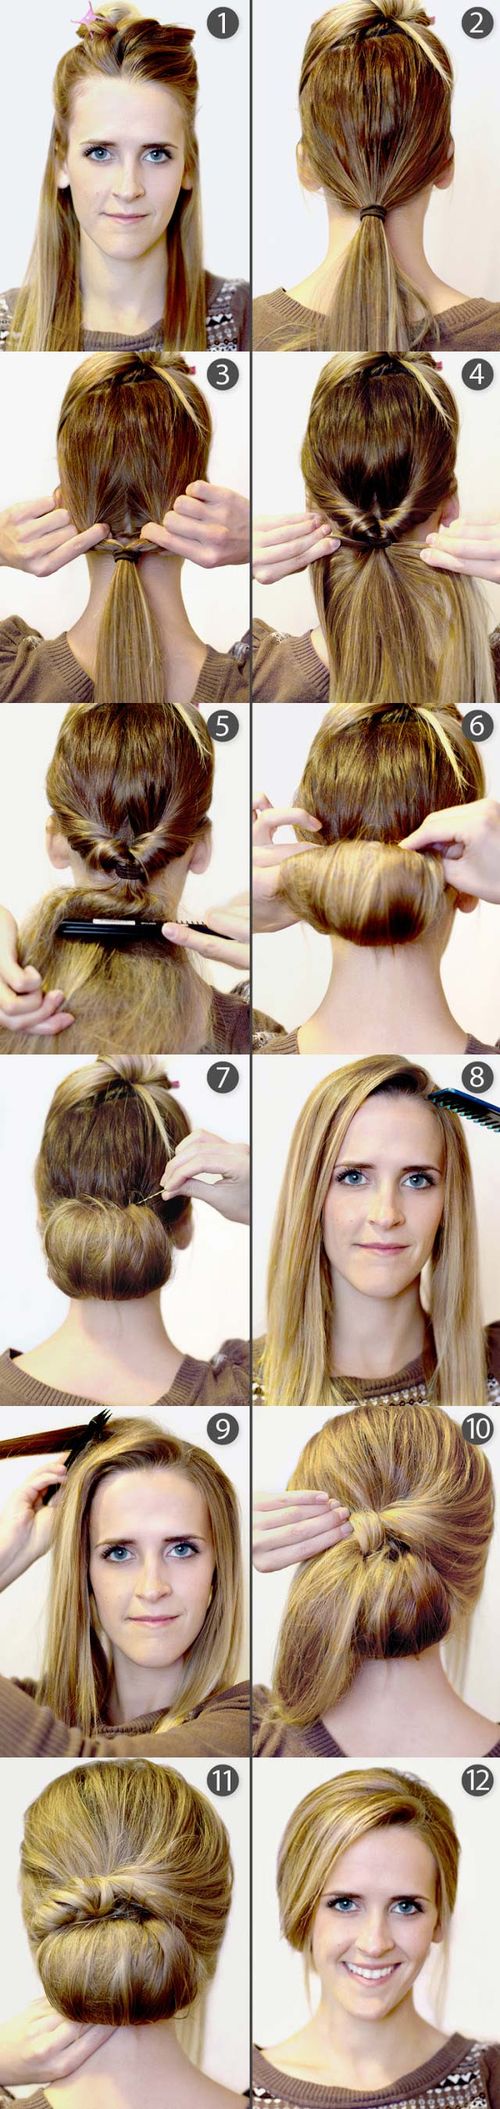 15 Quick DIY Hairstyle Ideas